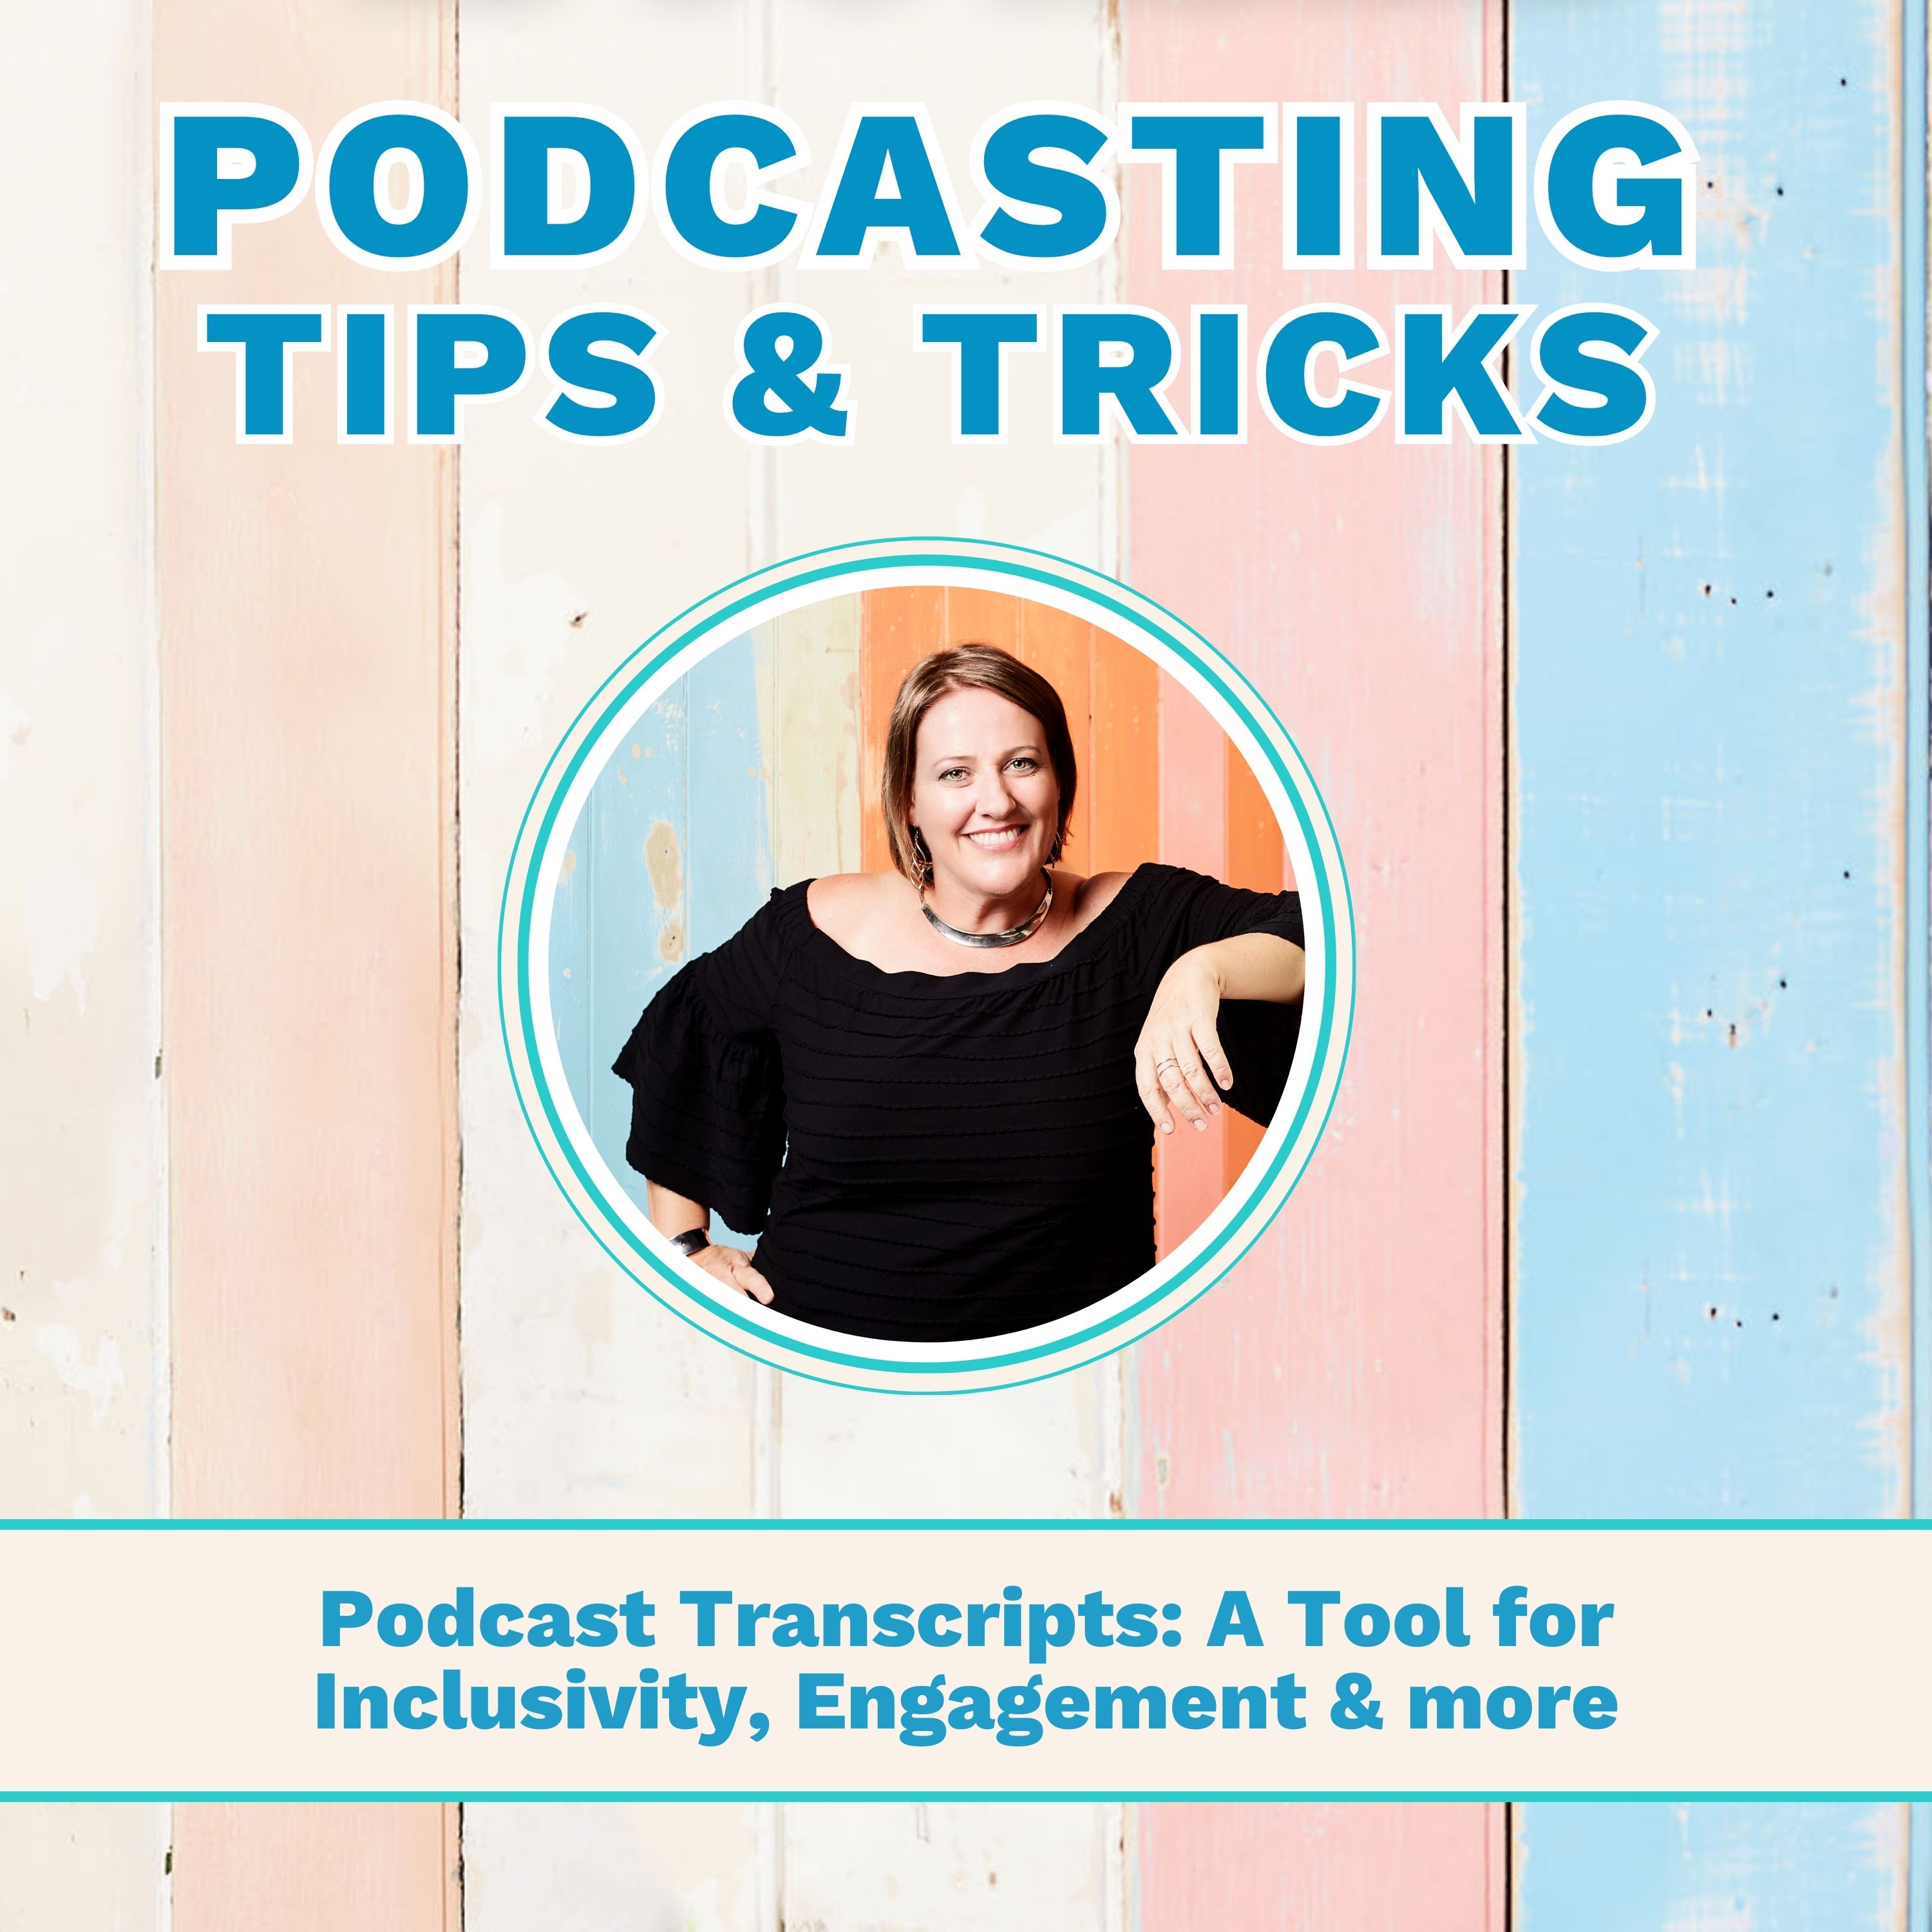 Podcast Transcripts - A Tool for Inclusivity, Engagement & More